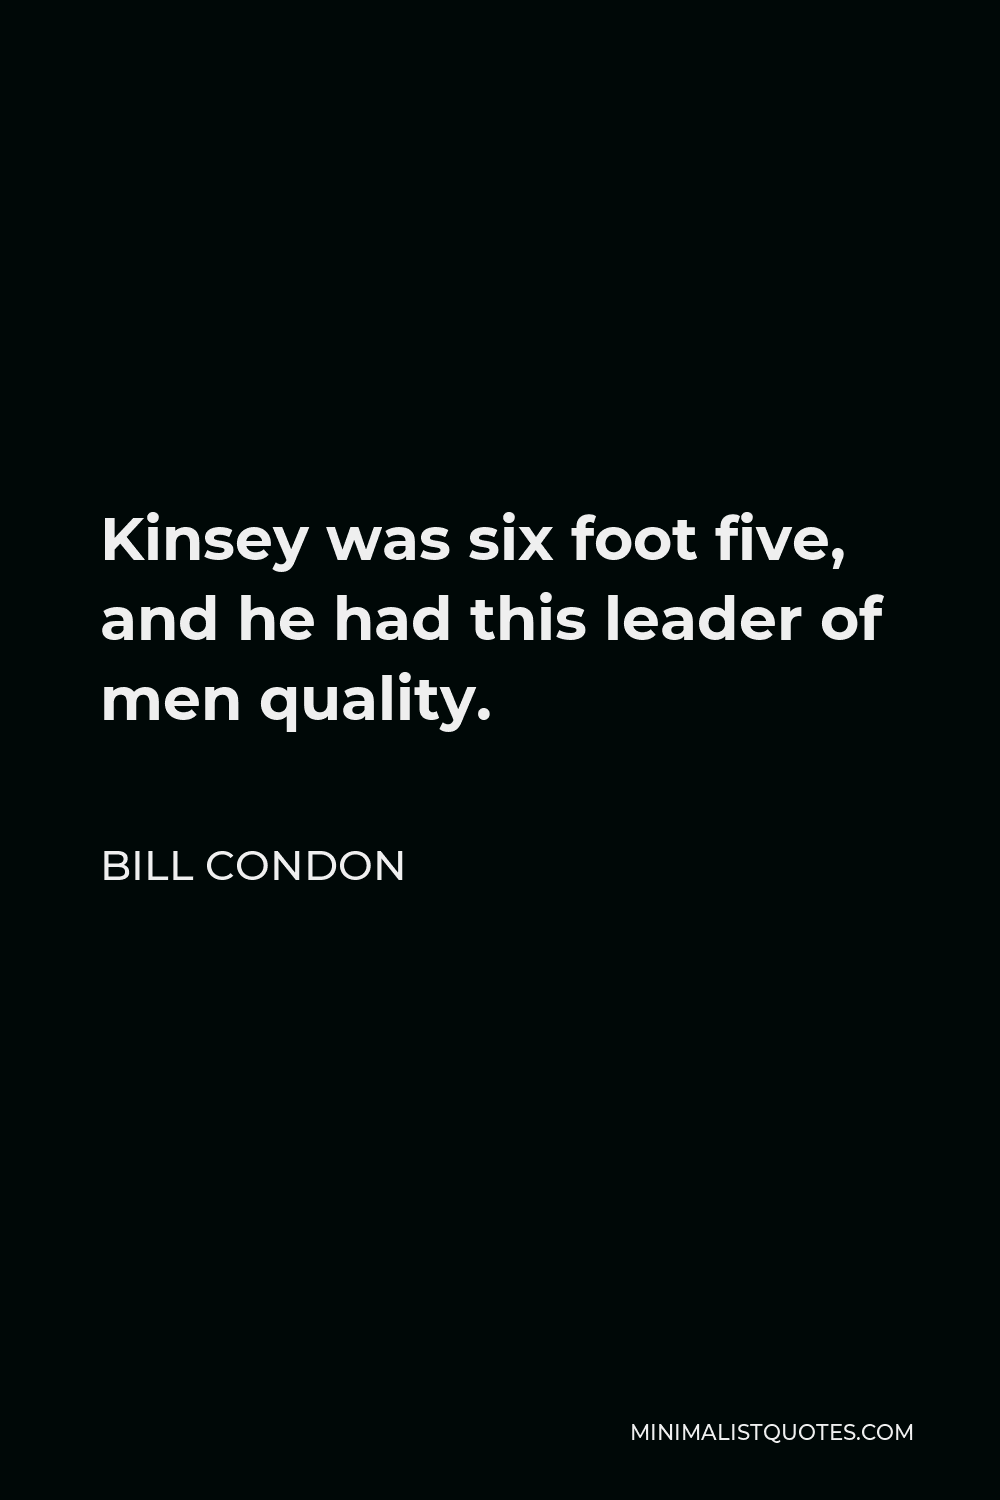 Bill Condon Quote - Kinsey was six foot five, and he had this leader of men quality.